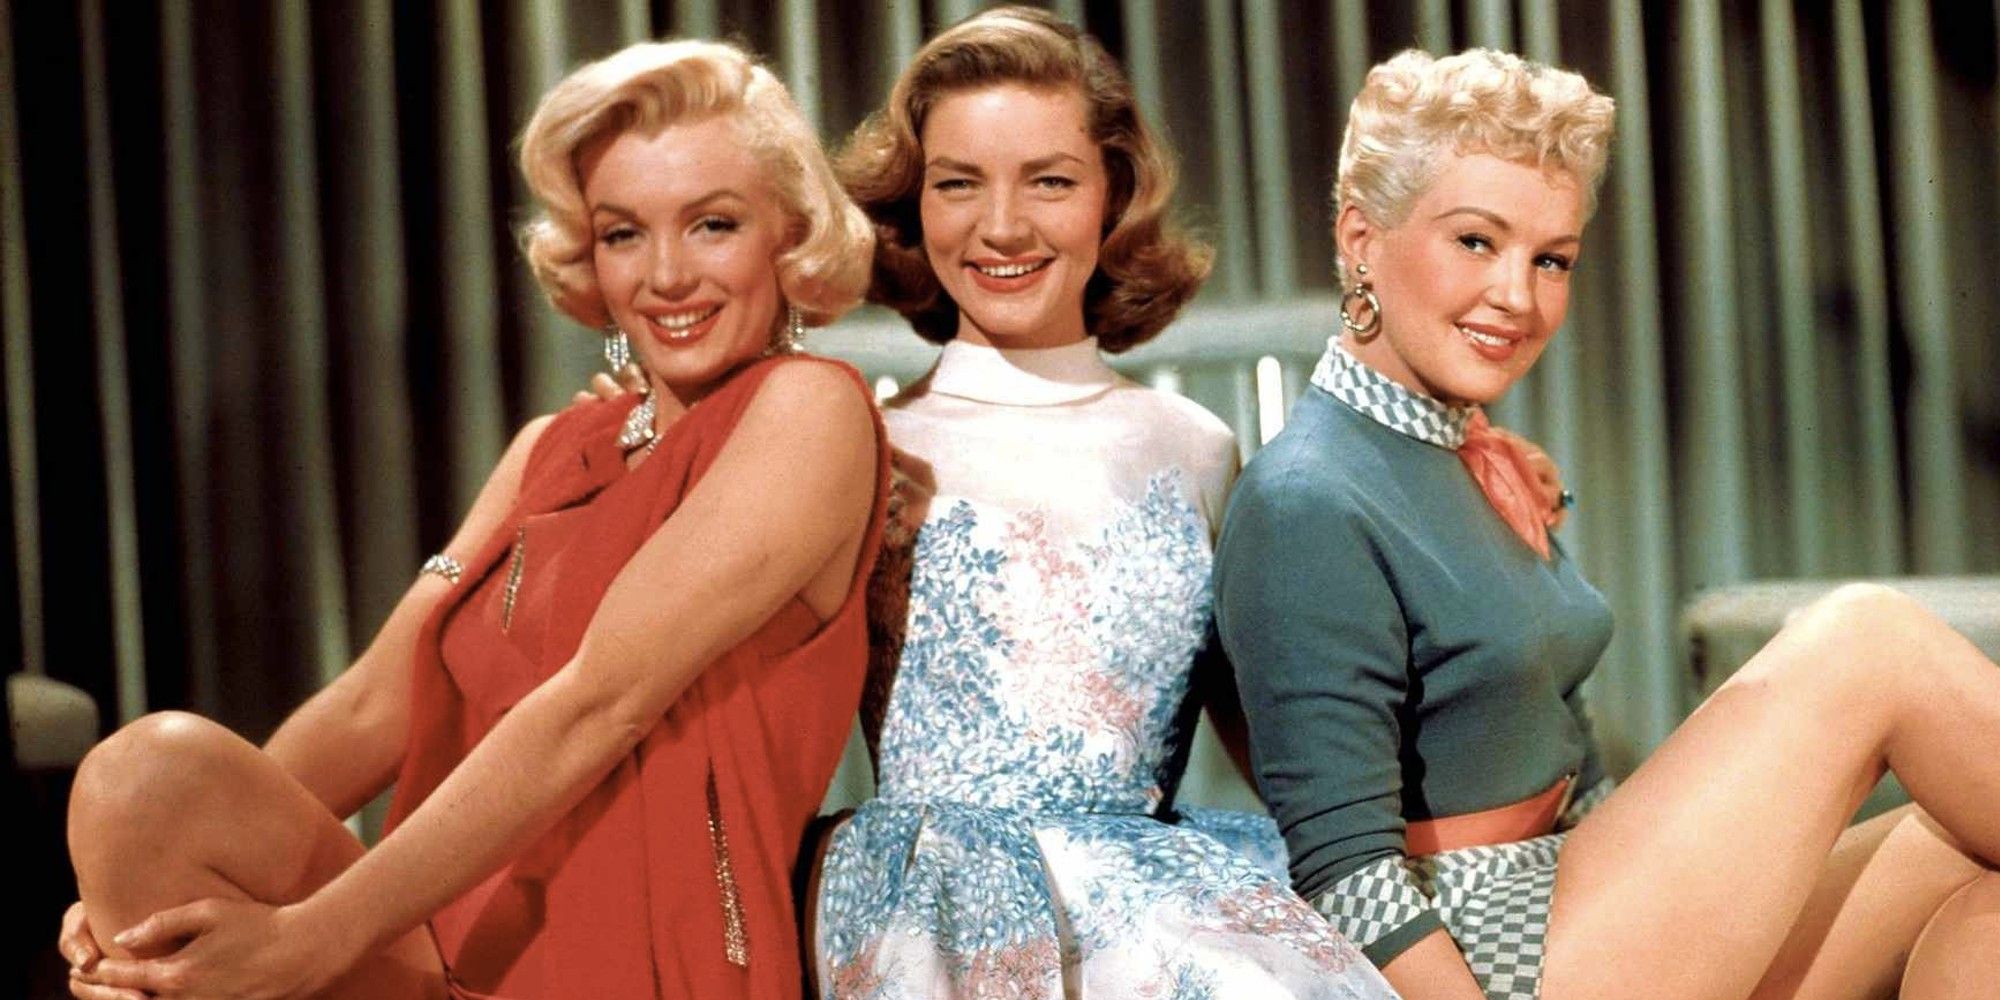 Marilyn Monroe, Lauren Bacall and Betty Grable in "How To Marry a Millionaire"